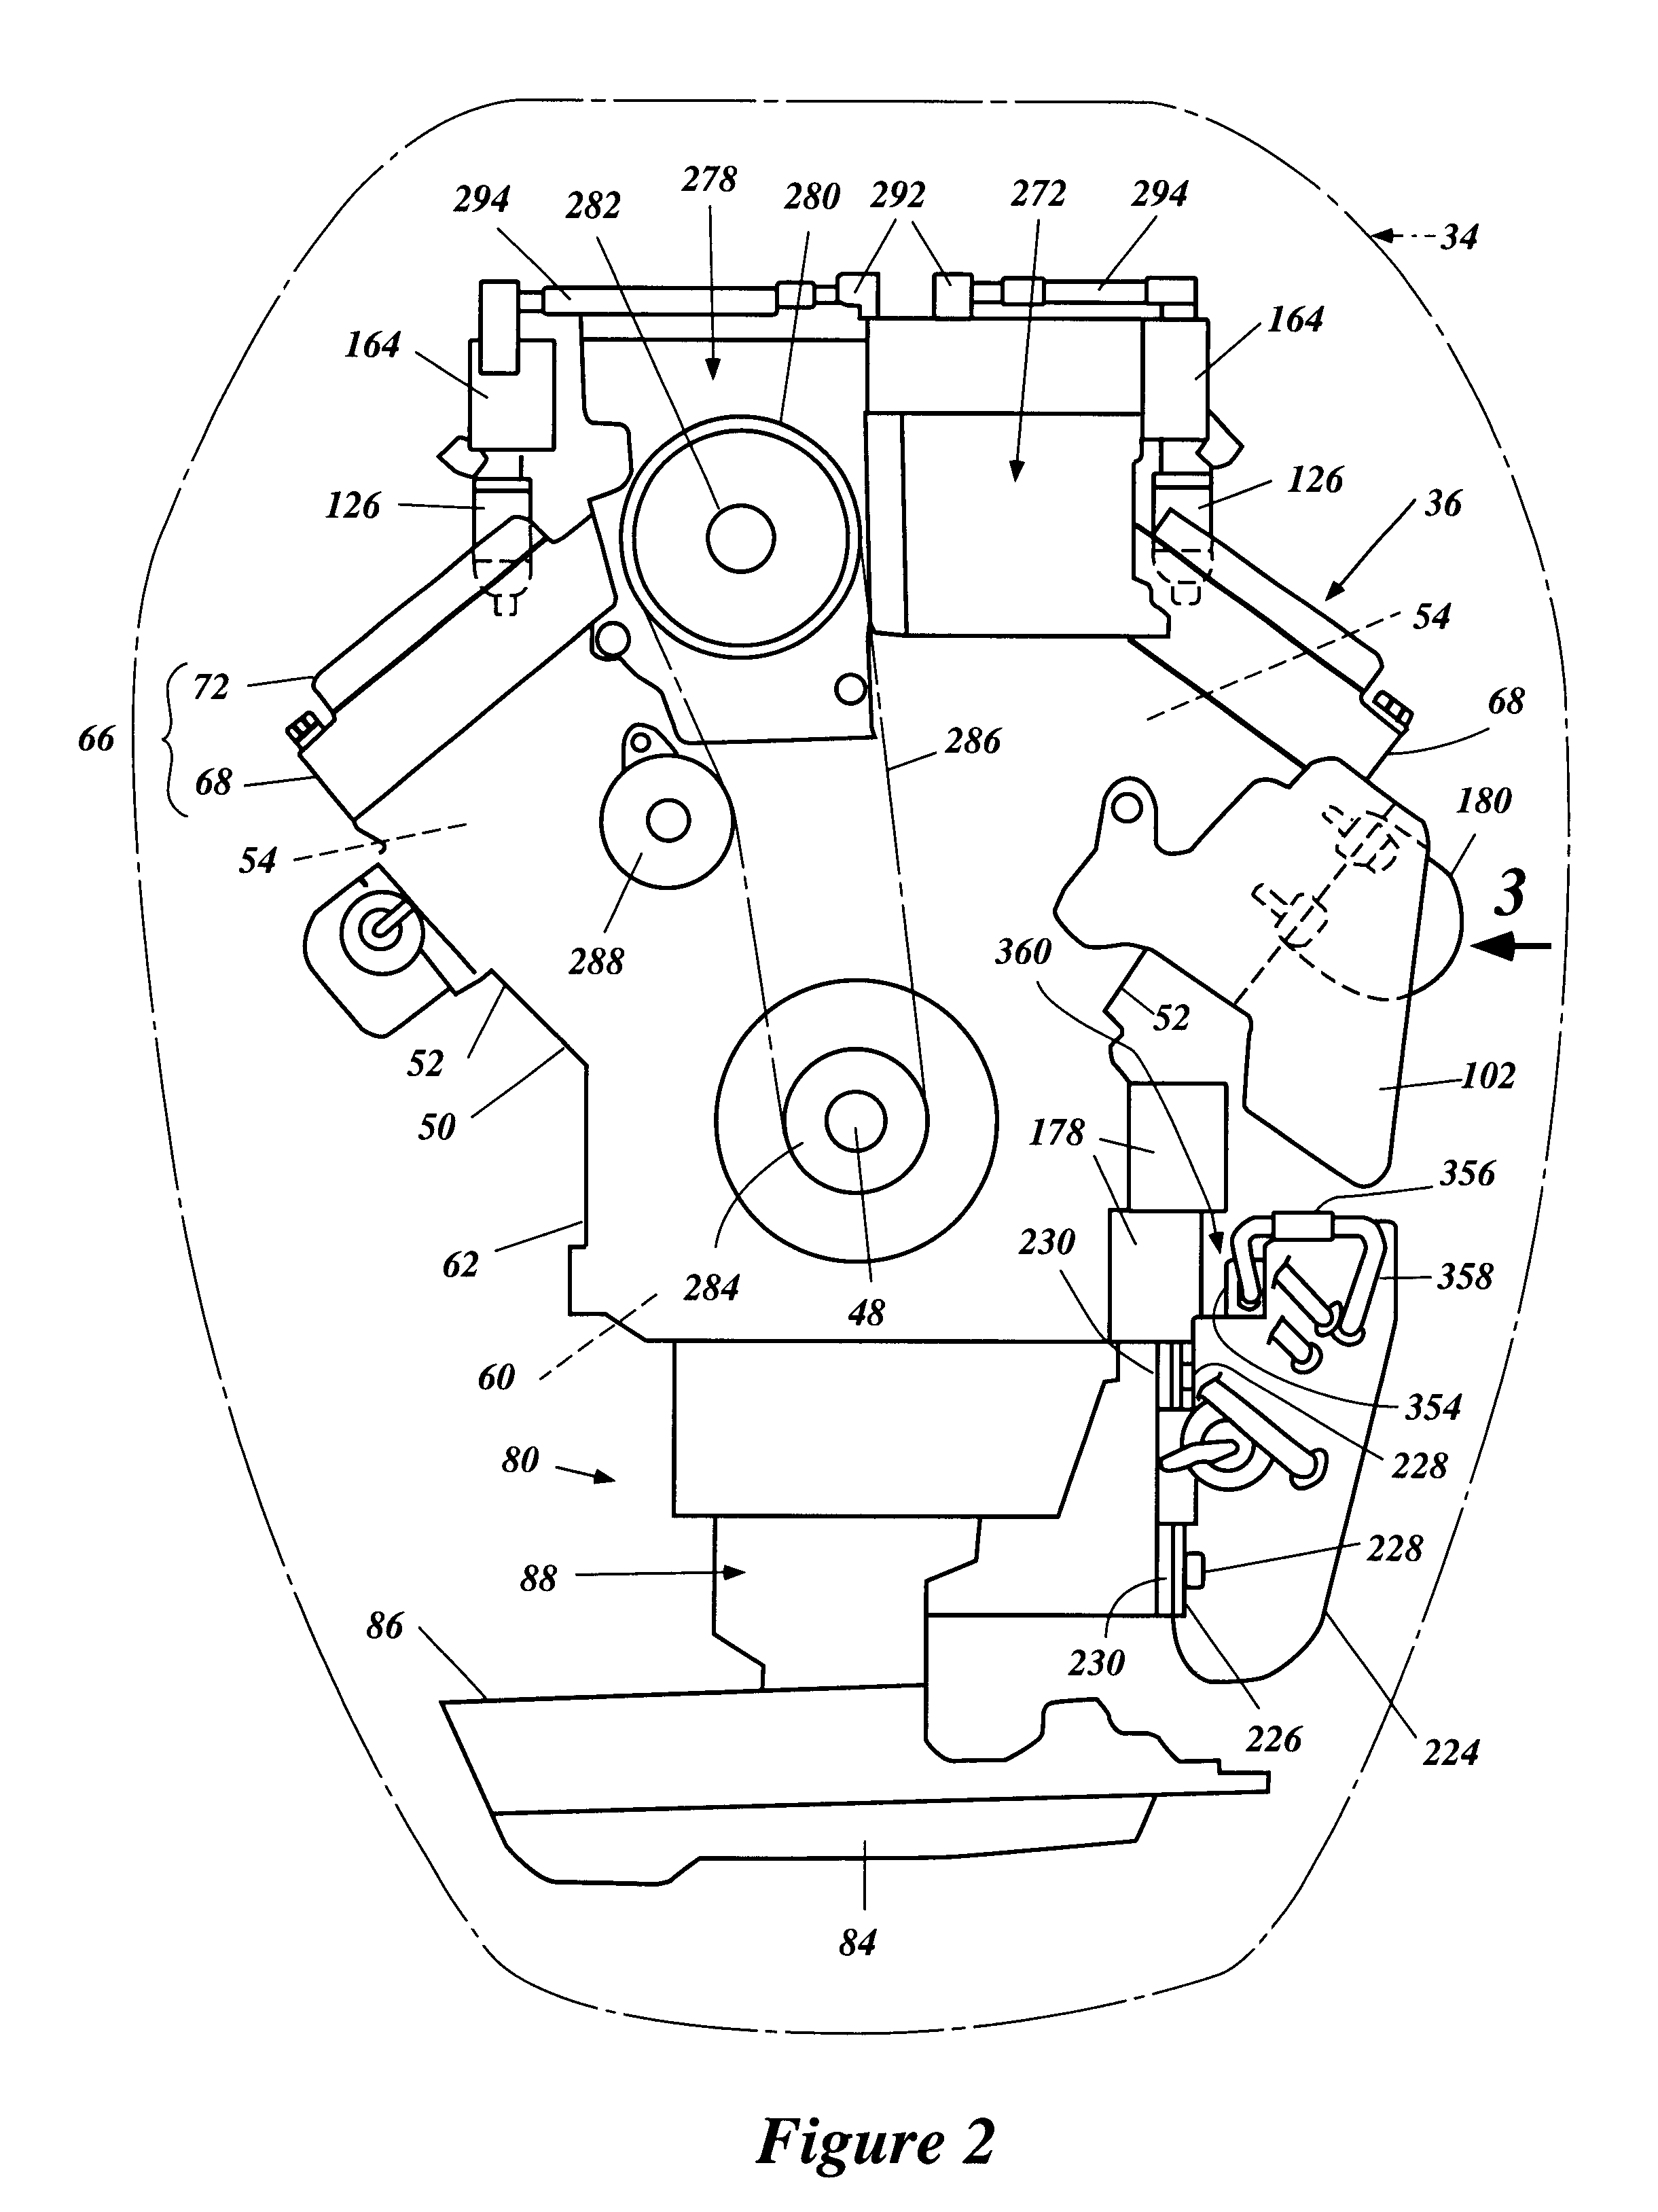 Fuel injection system for marine engine